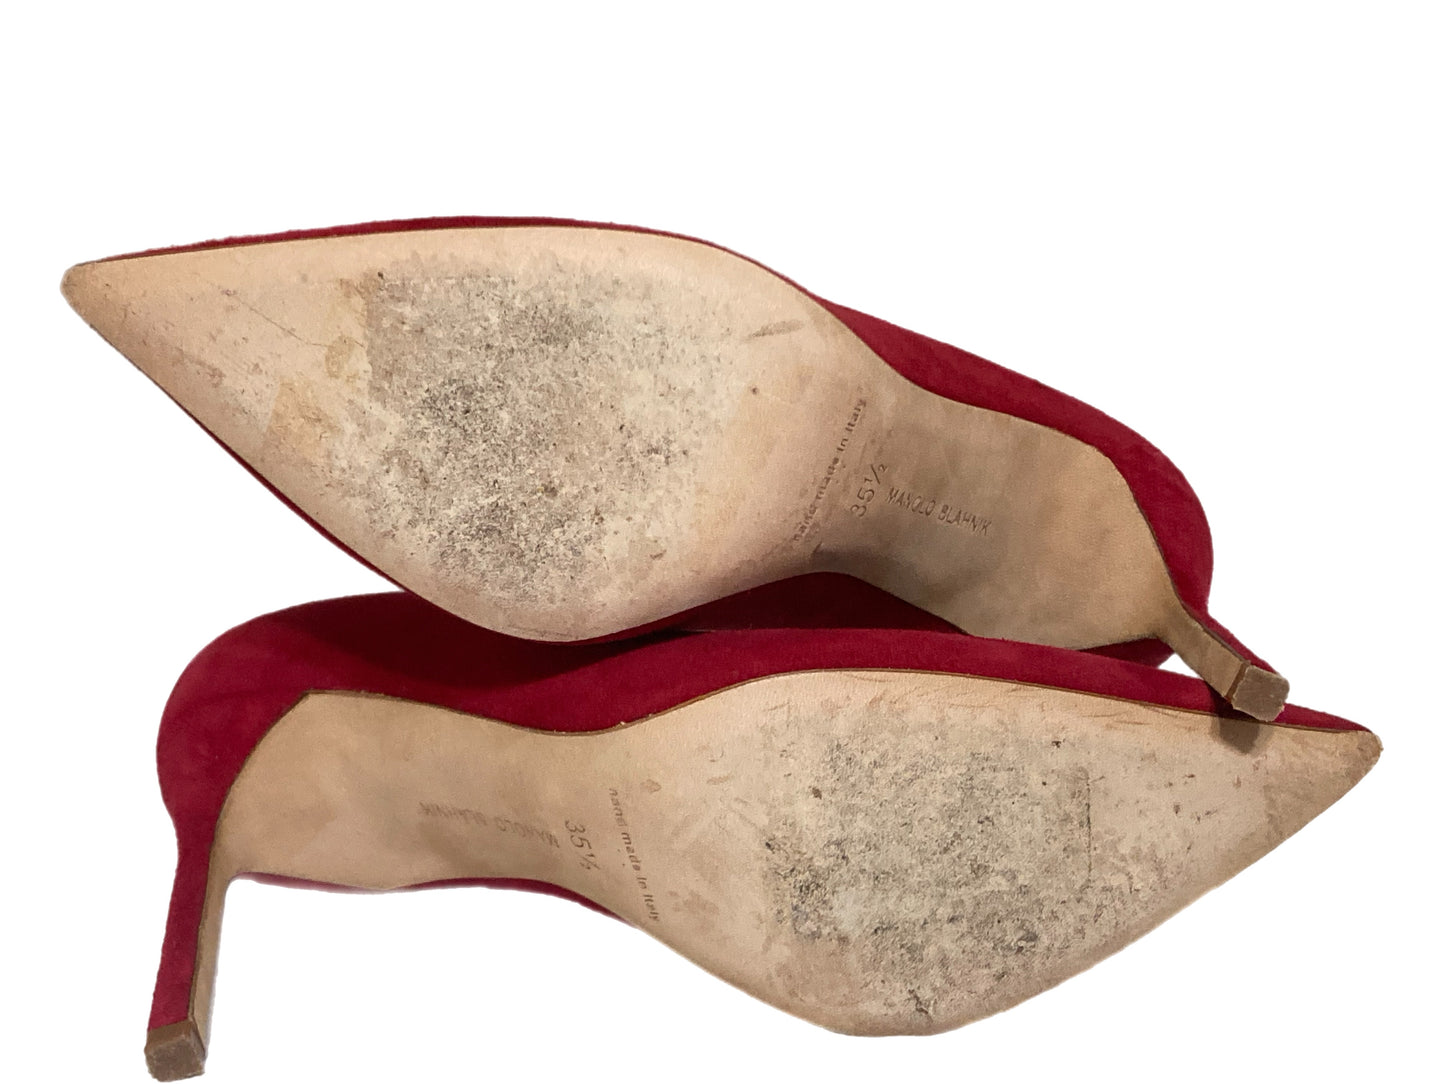 MANOLO BLAHNIK Suede Pointed Toe Pumps Red Size 35.5